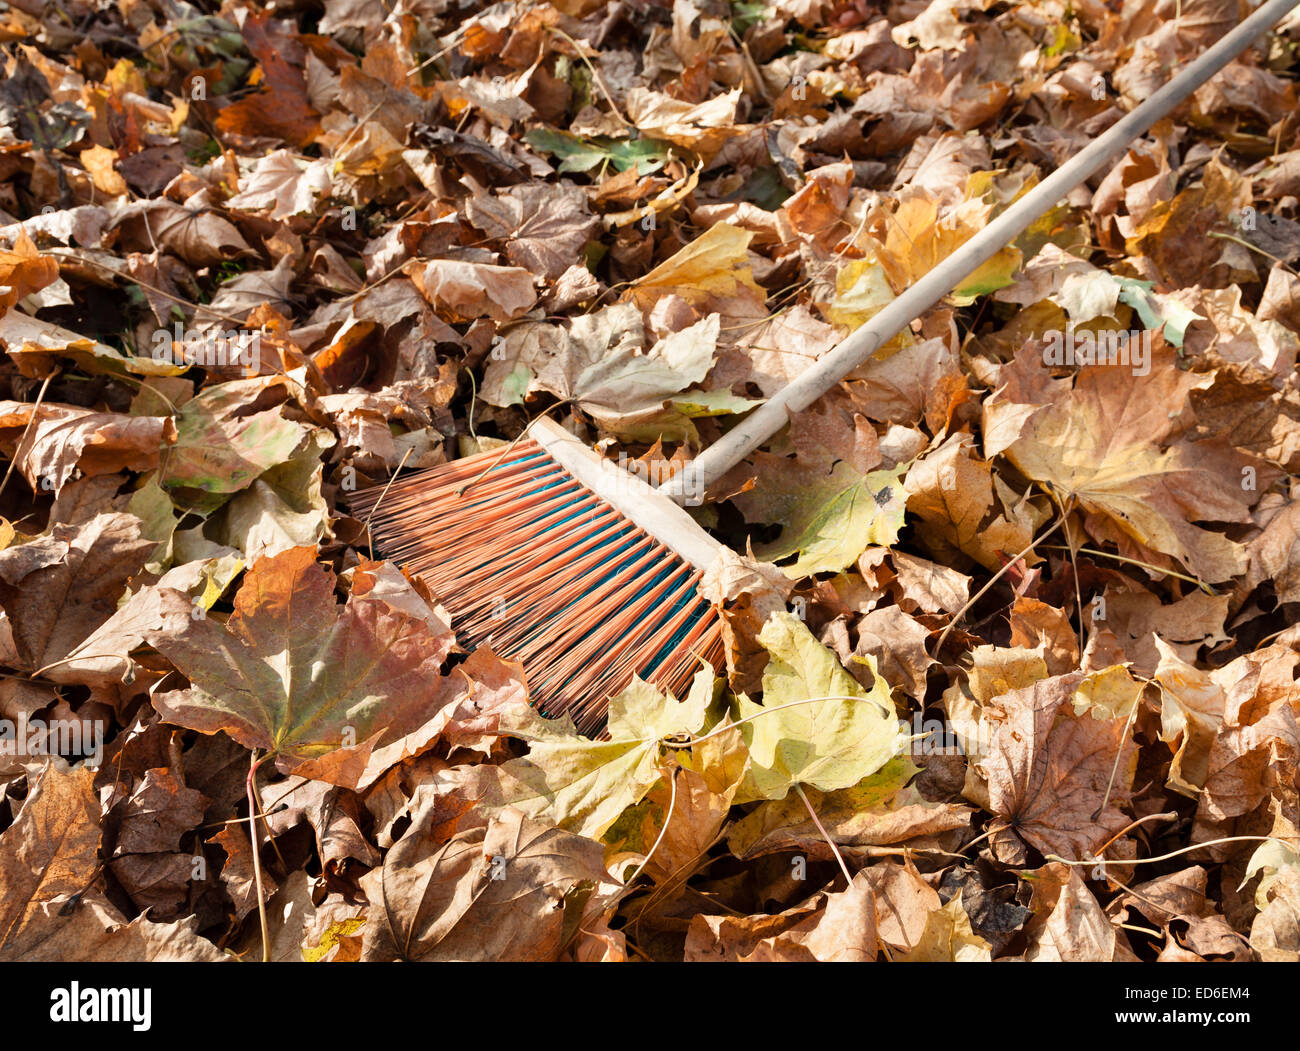 Old leaf rake lies in grassy lawn covered with fallen leaves Stock Photo